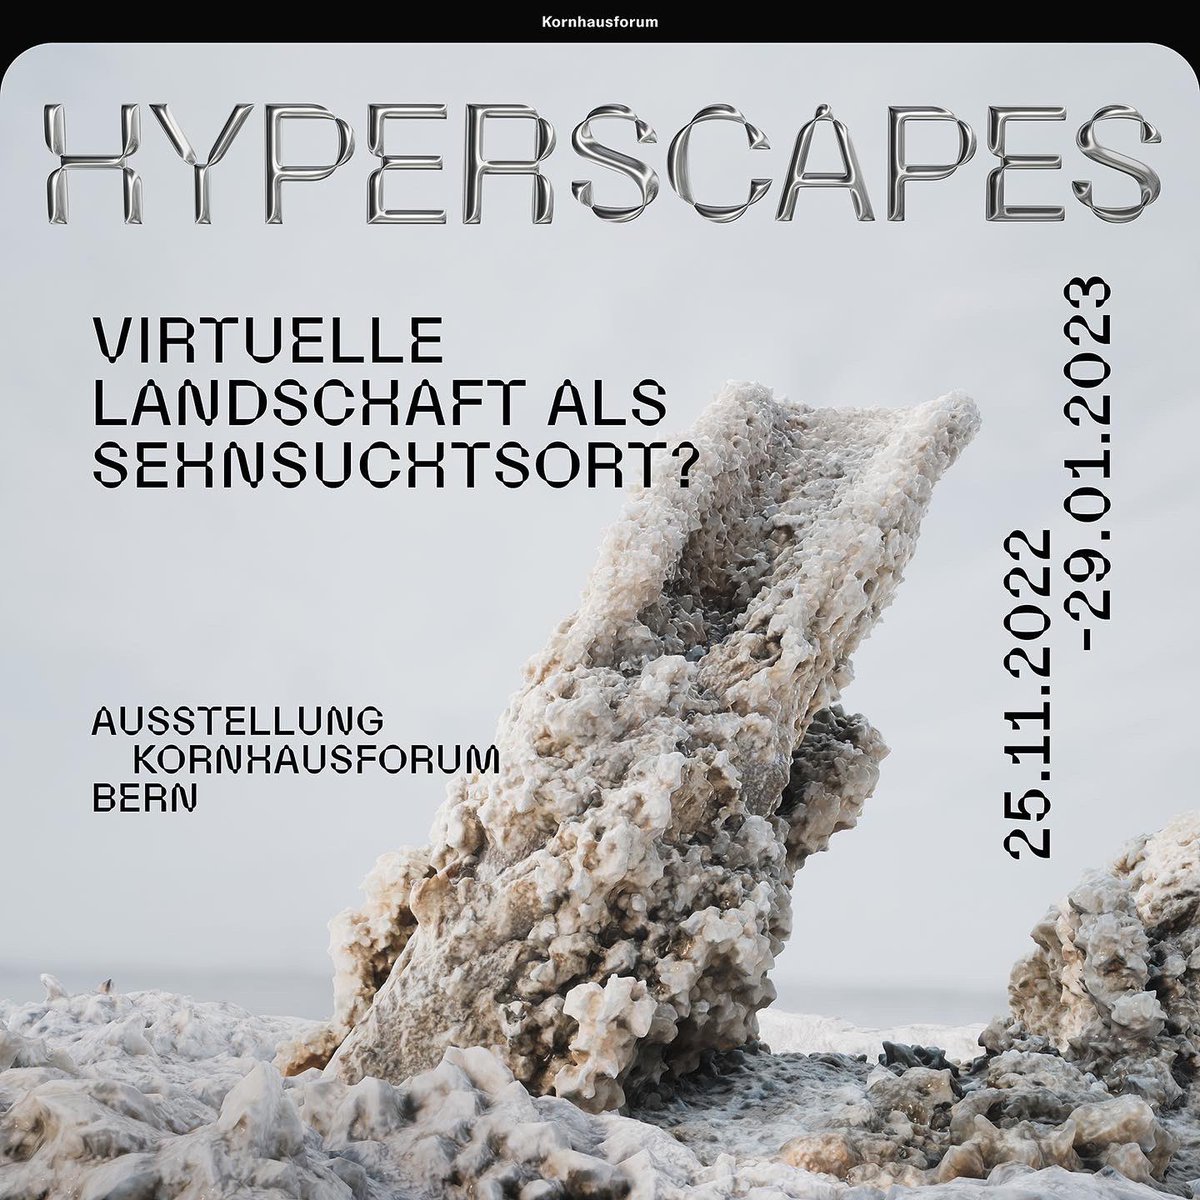 Excited about #HYPERSCAPES opening on Nov 24 at Kornhausforum! with these amaziing artists: 
#AliceBucknell, #MélanieCourtinat, #WizardWorks, #dribnet, #PascalGreco, #MélodieMousset, #DavidOReilly, #ChristianePeschek, @jakobkuds, #StudervandenBerg, #FreeLives, #TracyFullerton